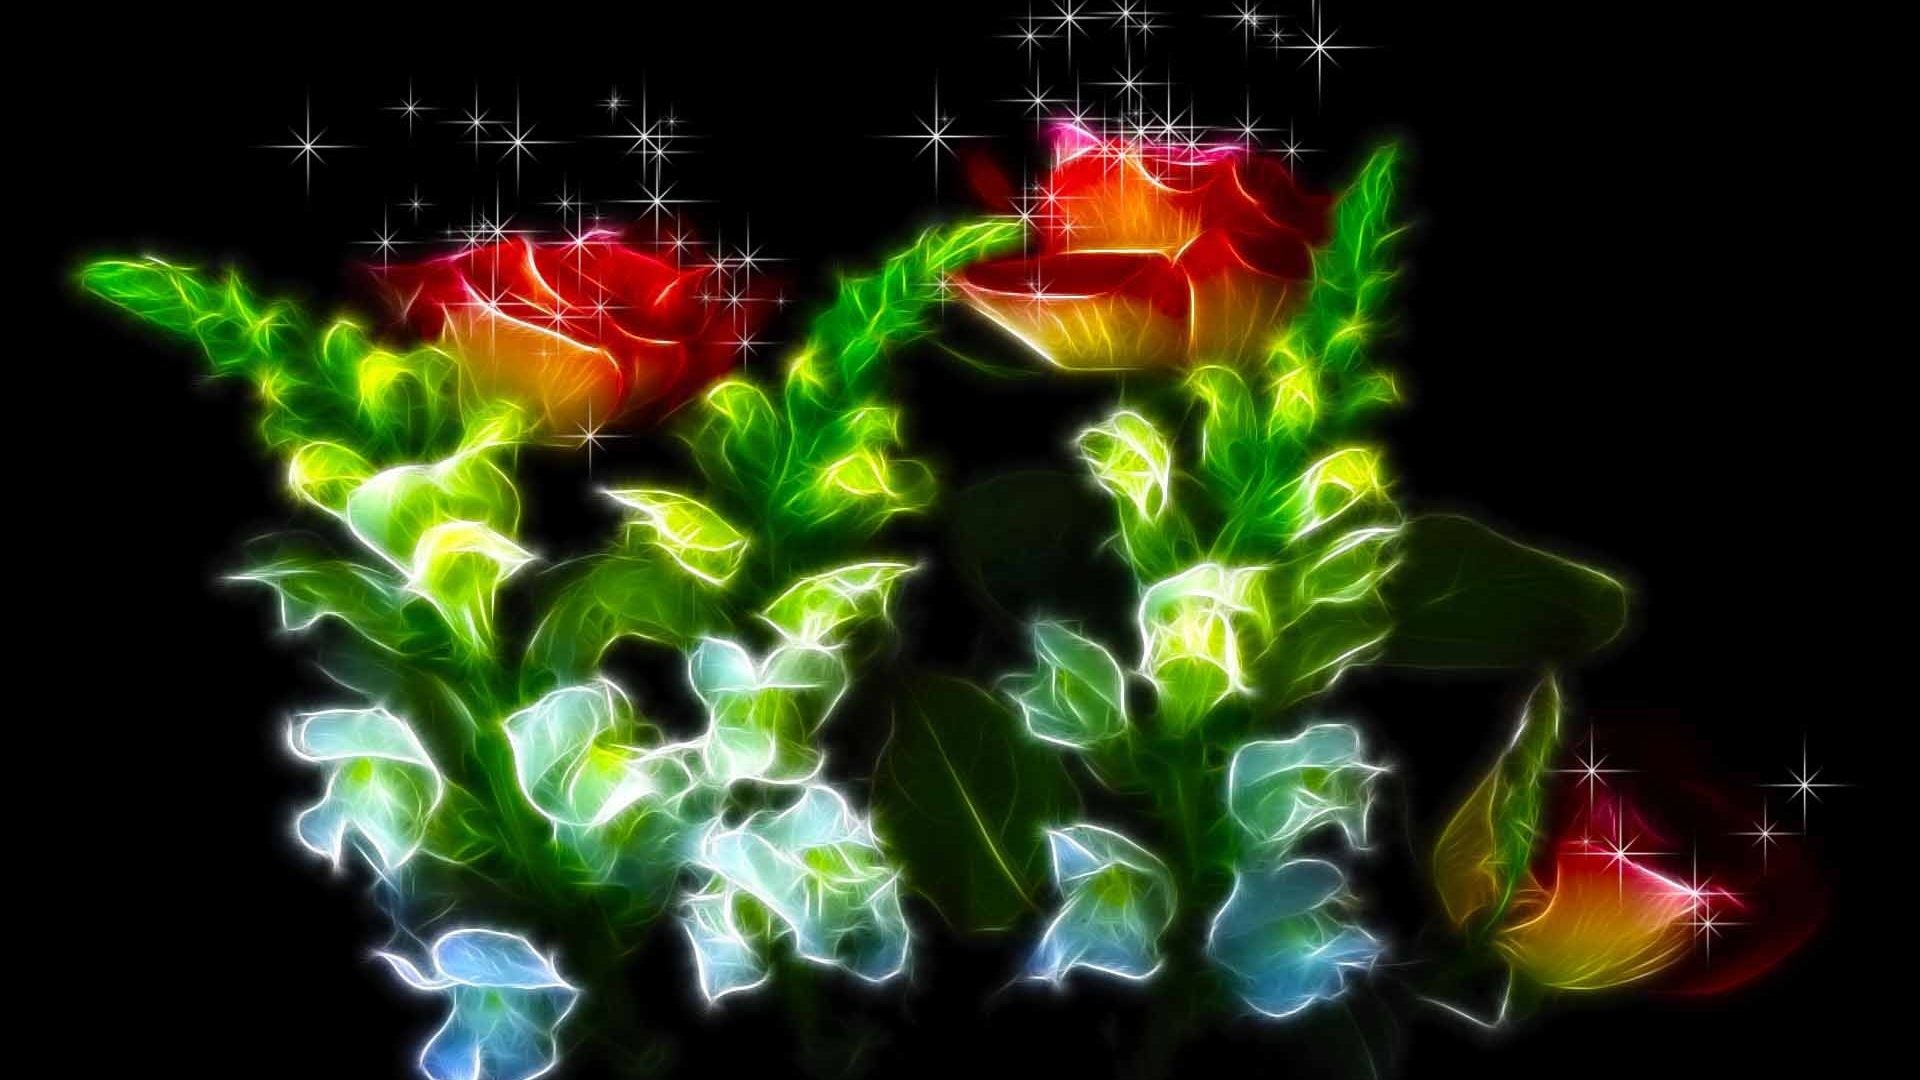 1920x1080 Day Fractalius Nature Loving Roses Celebration Beauty Flowers Sparkling  Mother Caring Flower Wallpaper Iphone 5 - 1920x1200